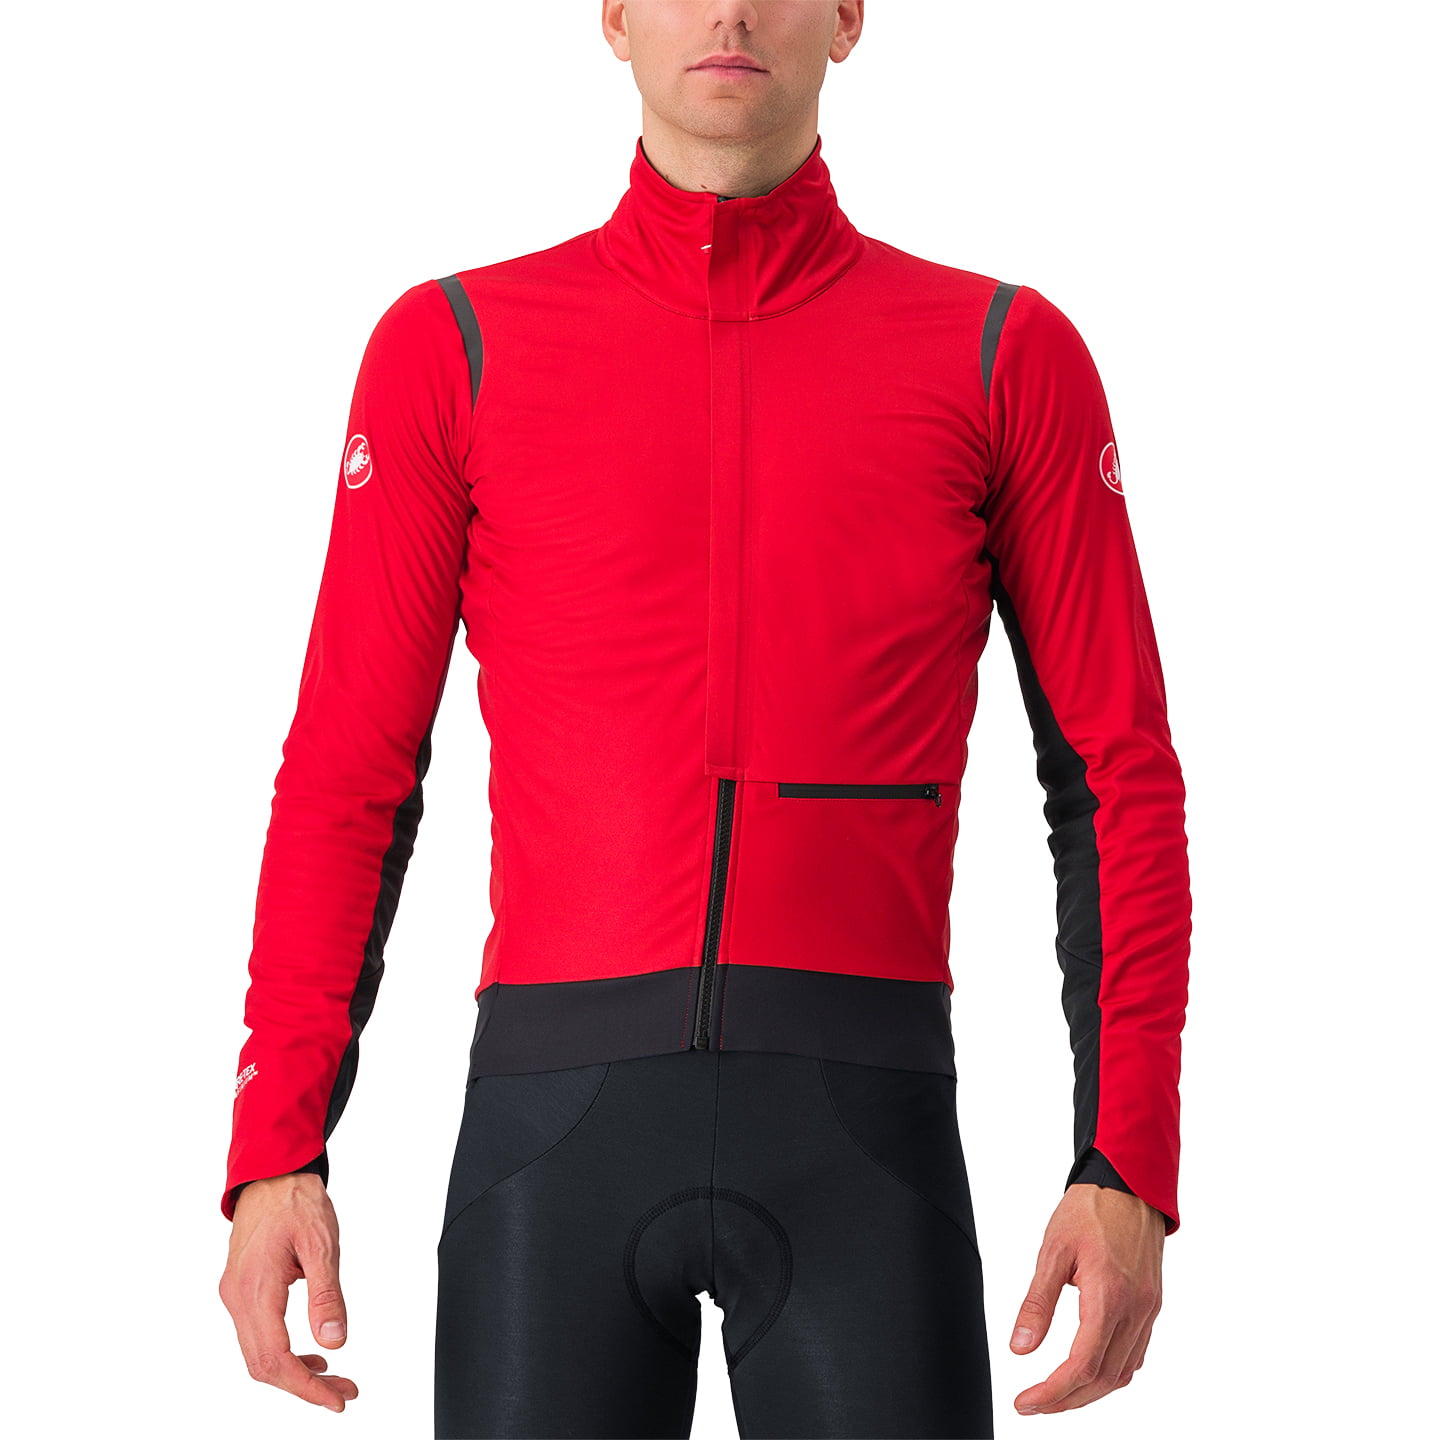 CASTELLI Winter Jacket Alpha Doppio RoS Thermal Jacket, for men, size L, Winter jacket, Cycle clothing